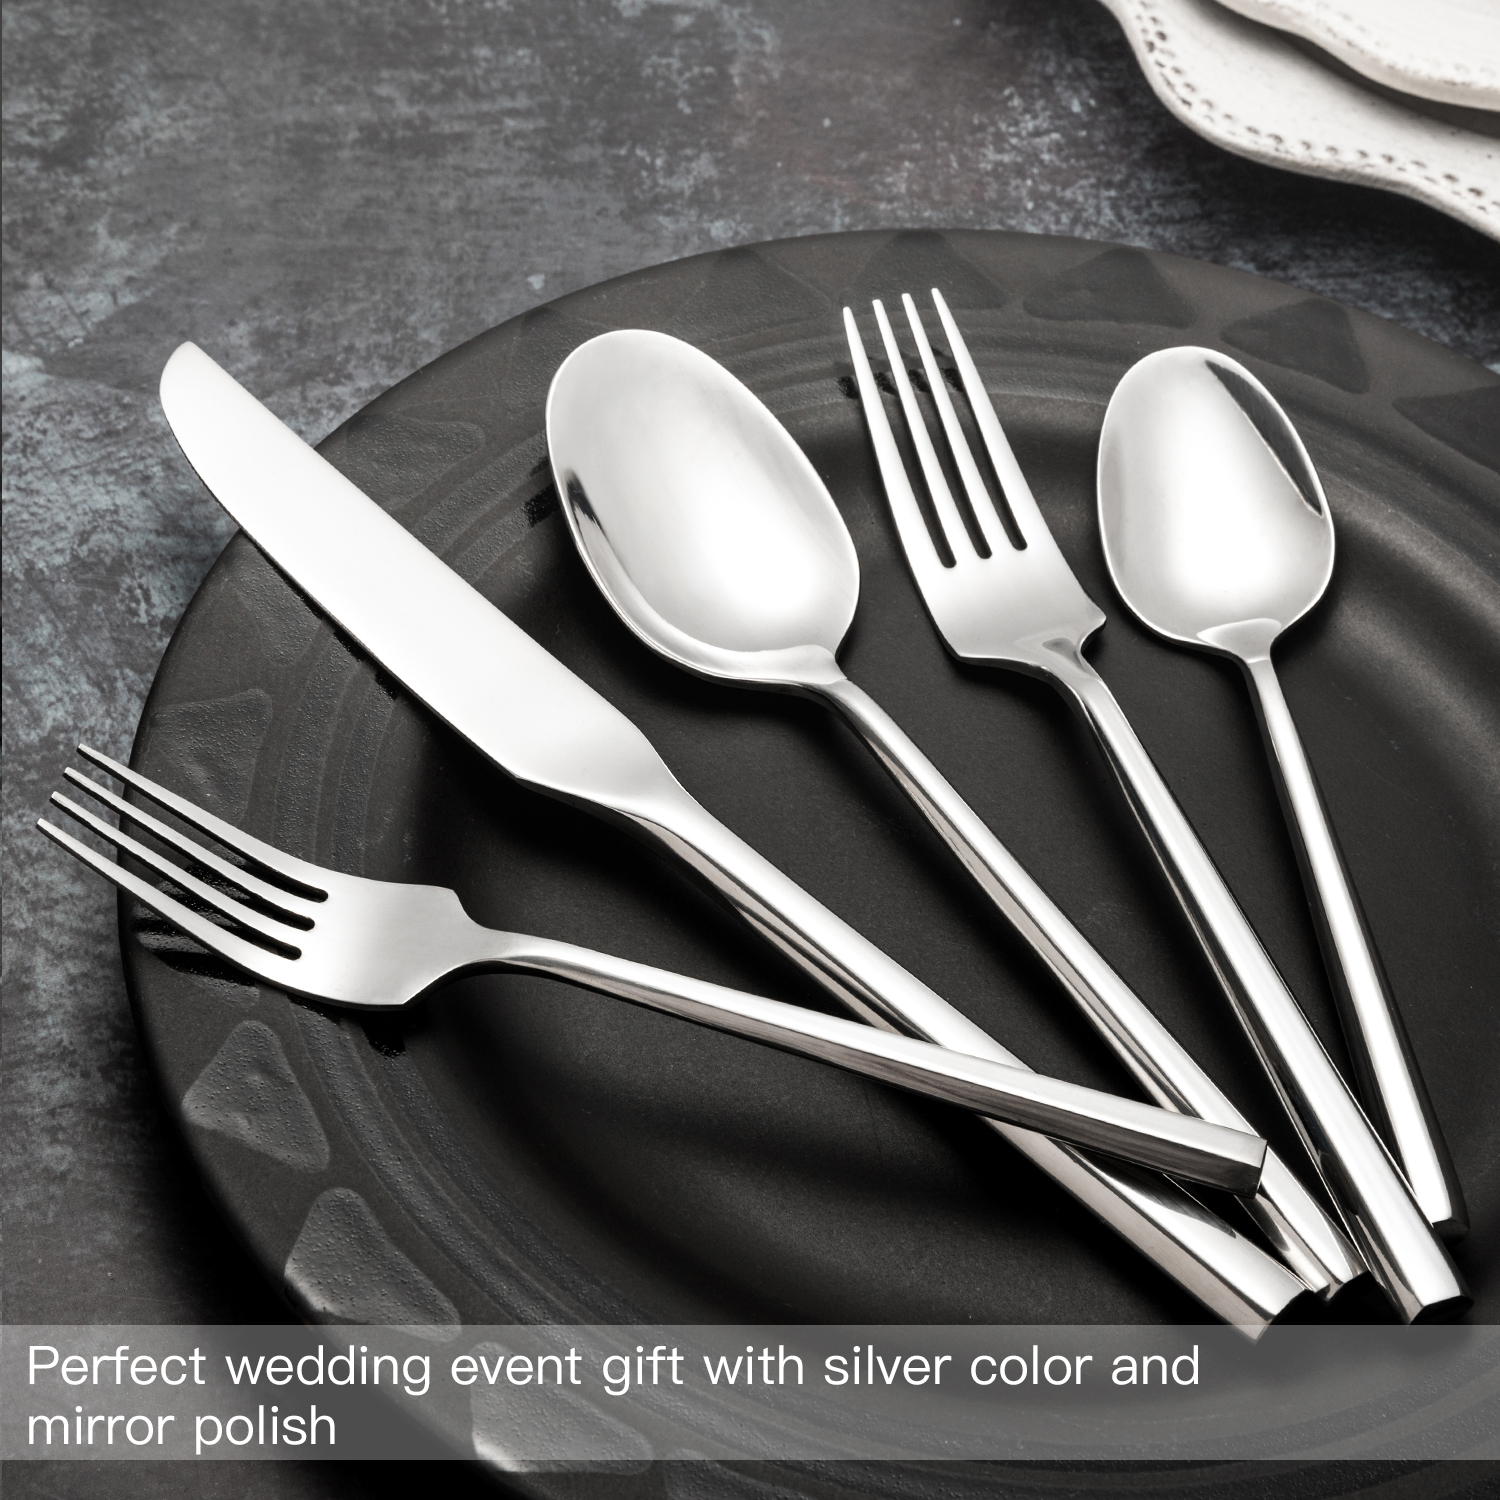 OEM Customized Hammered Flatware Set - Wholesale Hexagon Handle Stainless Steel Silverware Set for Wedding Hotel Party Event,Dishwasher Safe – Liou